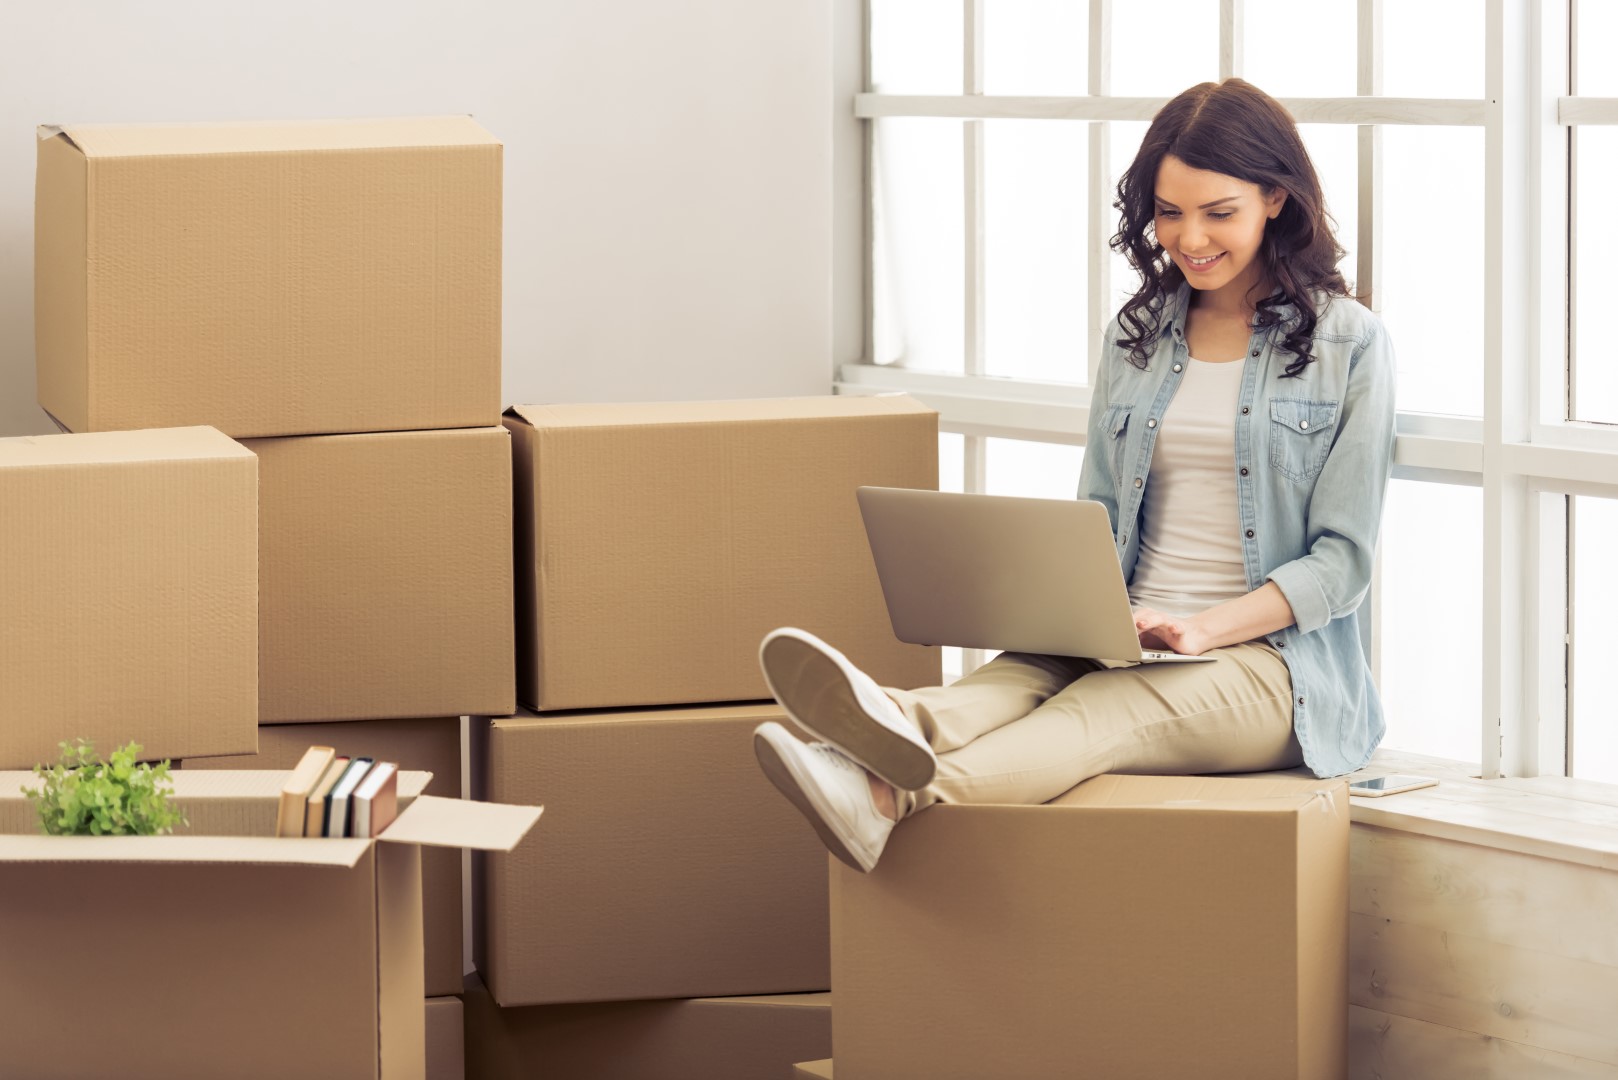 Young woman is moving, sitting among cardboard boxes, using a laptop and smiling